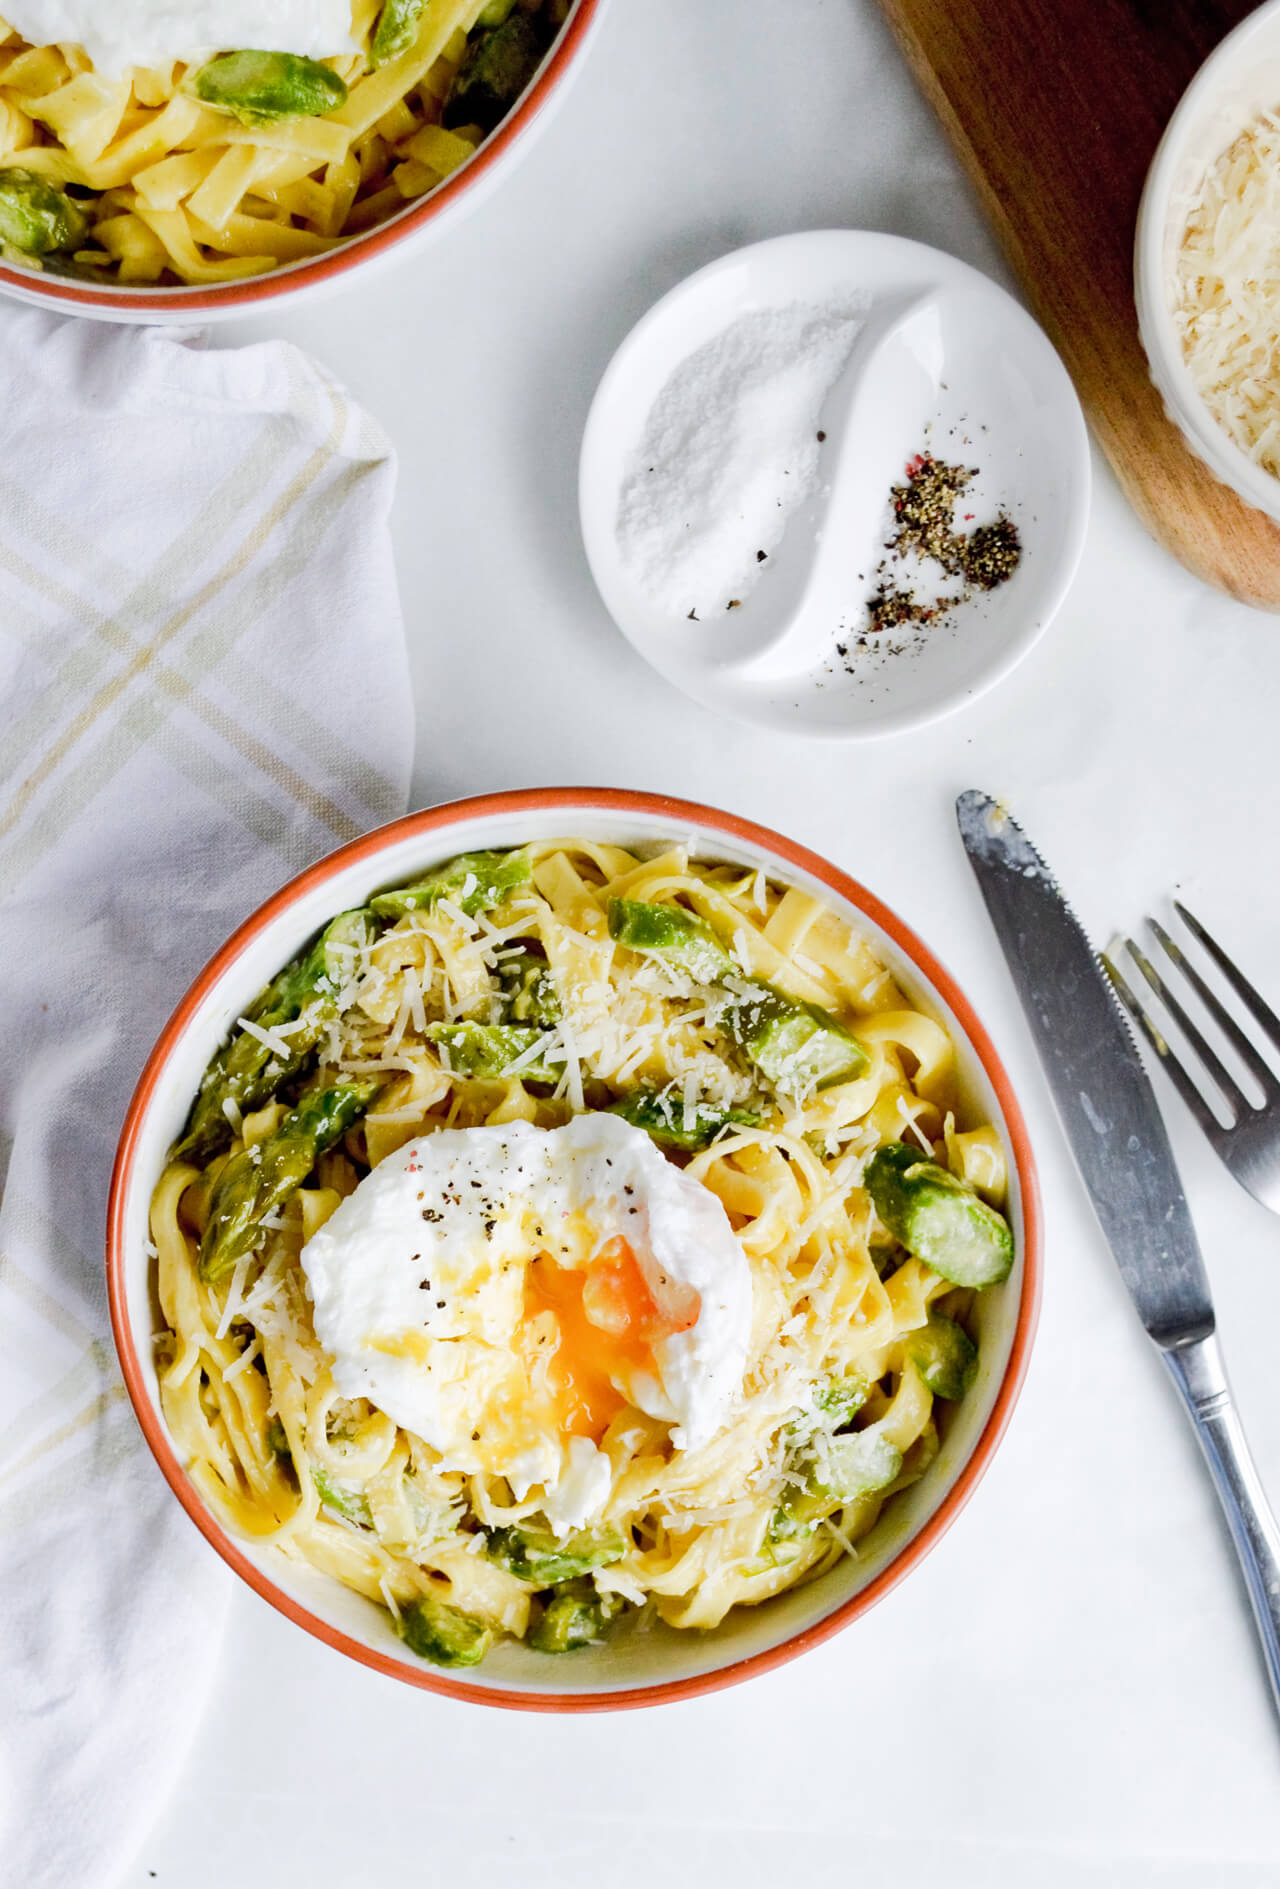 Creamy asparagus tagliatelle with poached eggs - a quick and wonderful asparagus dinner.